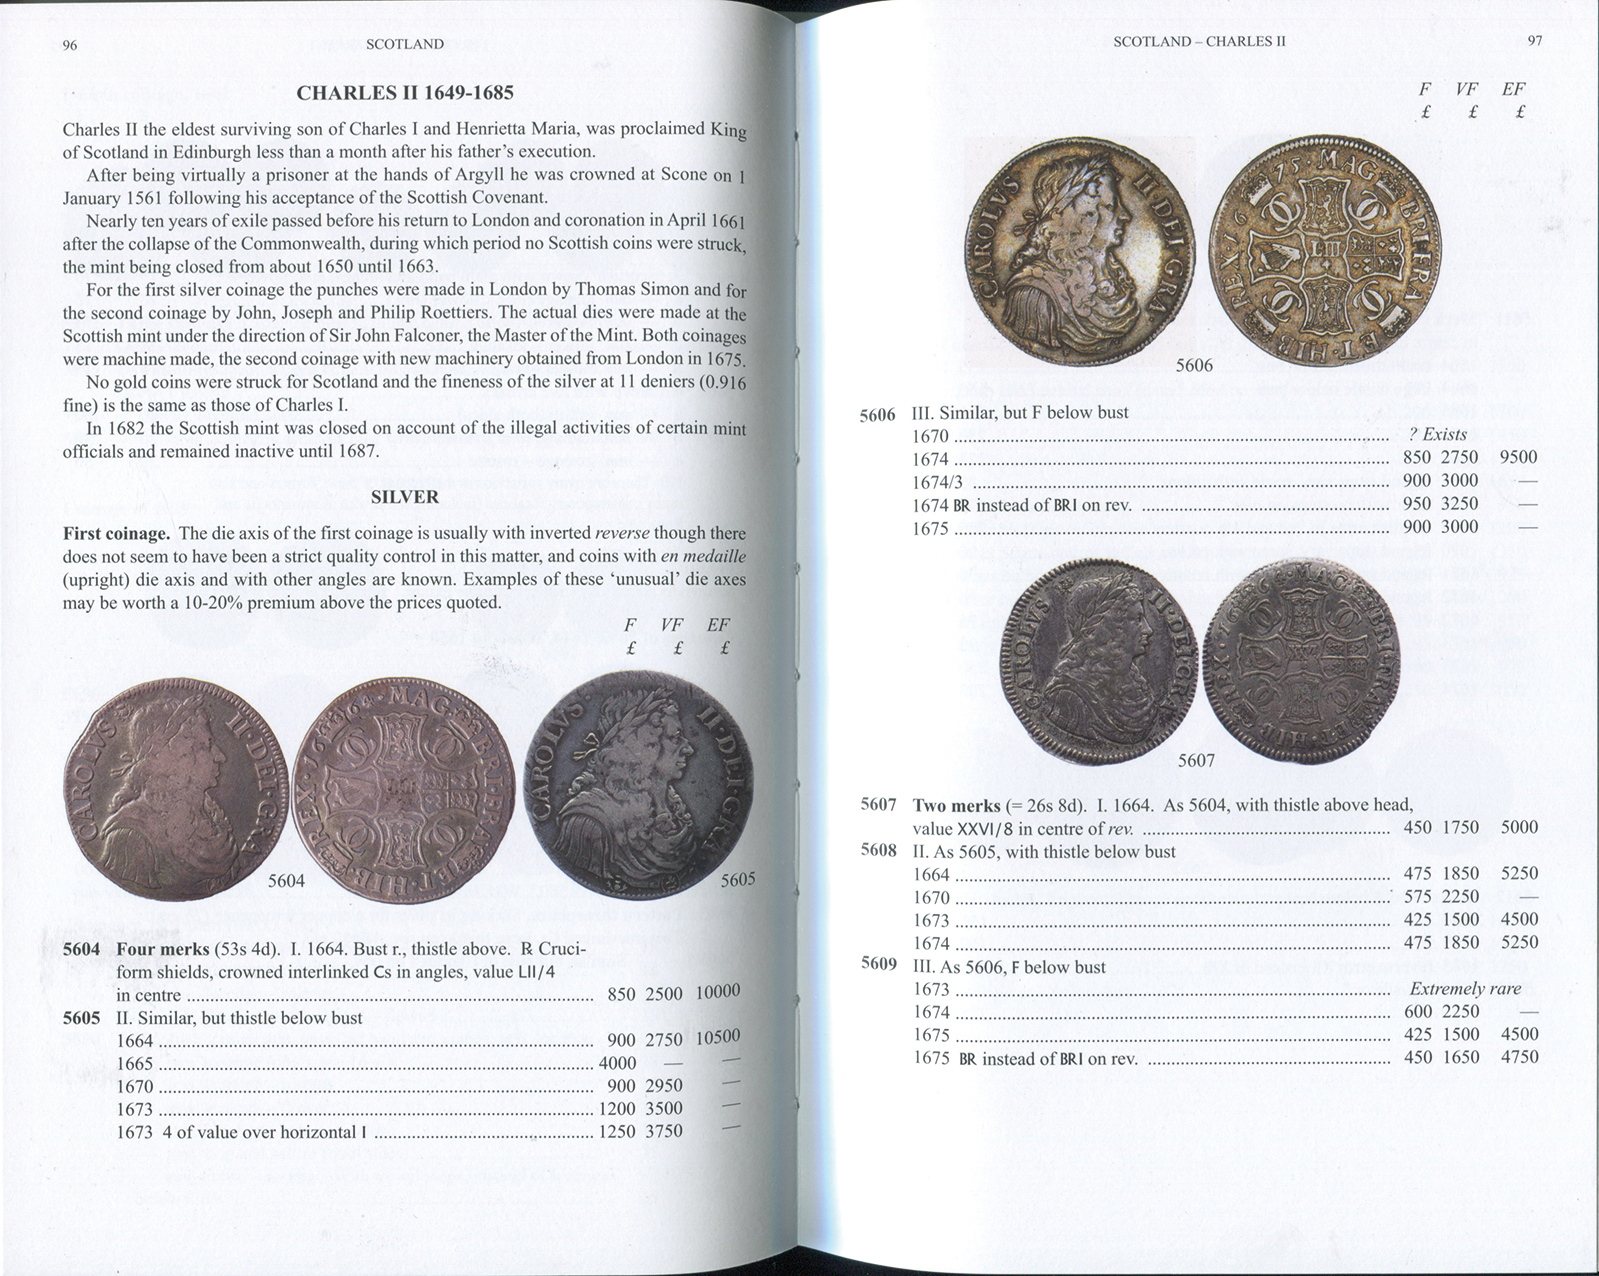 Coins of Scotland 4th Ed. Ireland and the Islands Includes Anglo-Gallic Coins 